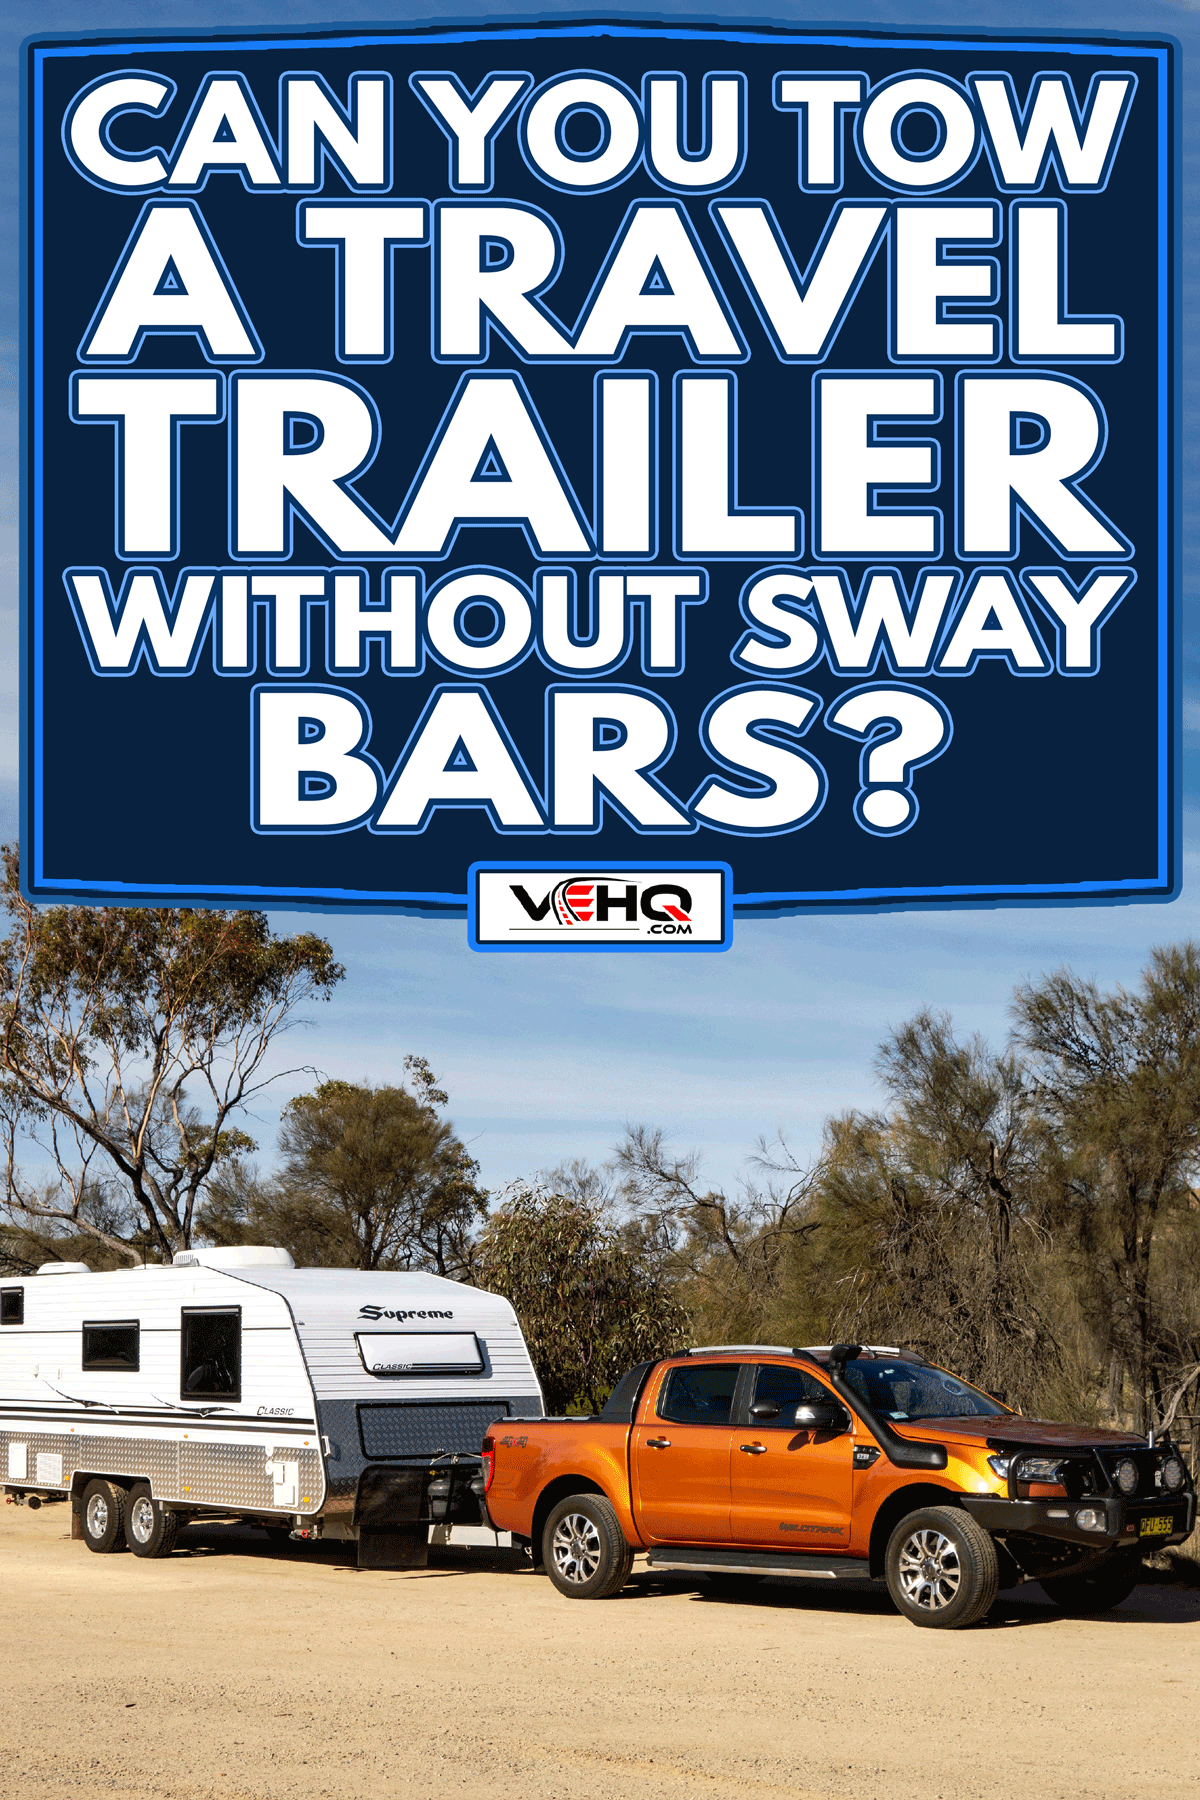 A Ford Ranger Wildtrack off road pickup towing a white caravan trailer, Can You Tow A Travel Trailer Without Sway Bars?